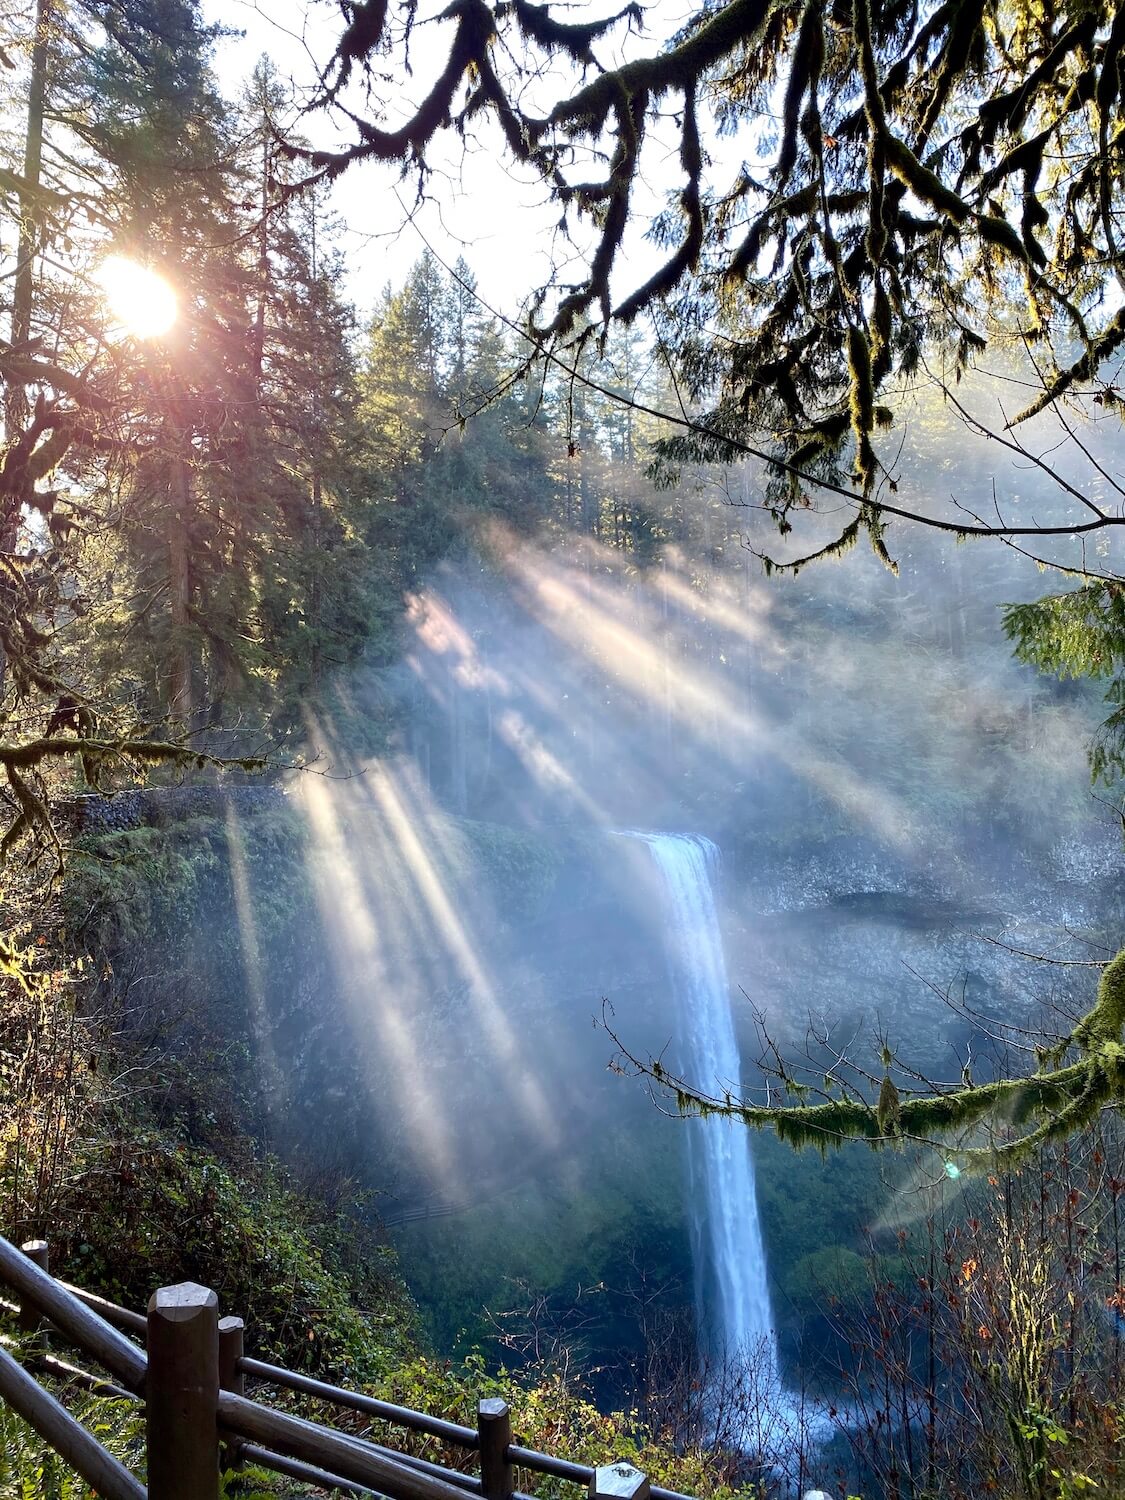 This misty morning view of South Falls, which is the statuesque feature of the Trail of Ten Falls in Silver Falls State Park in Oregon.  Sunbeams gently flow between the branches of forest trees as mist rises up from the churning water flowing over an ancient volcanic cliff covered with green moss and ferns.  Far below a fenced path can be faintly seen just above a pool of frothy mountain water.  